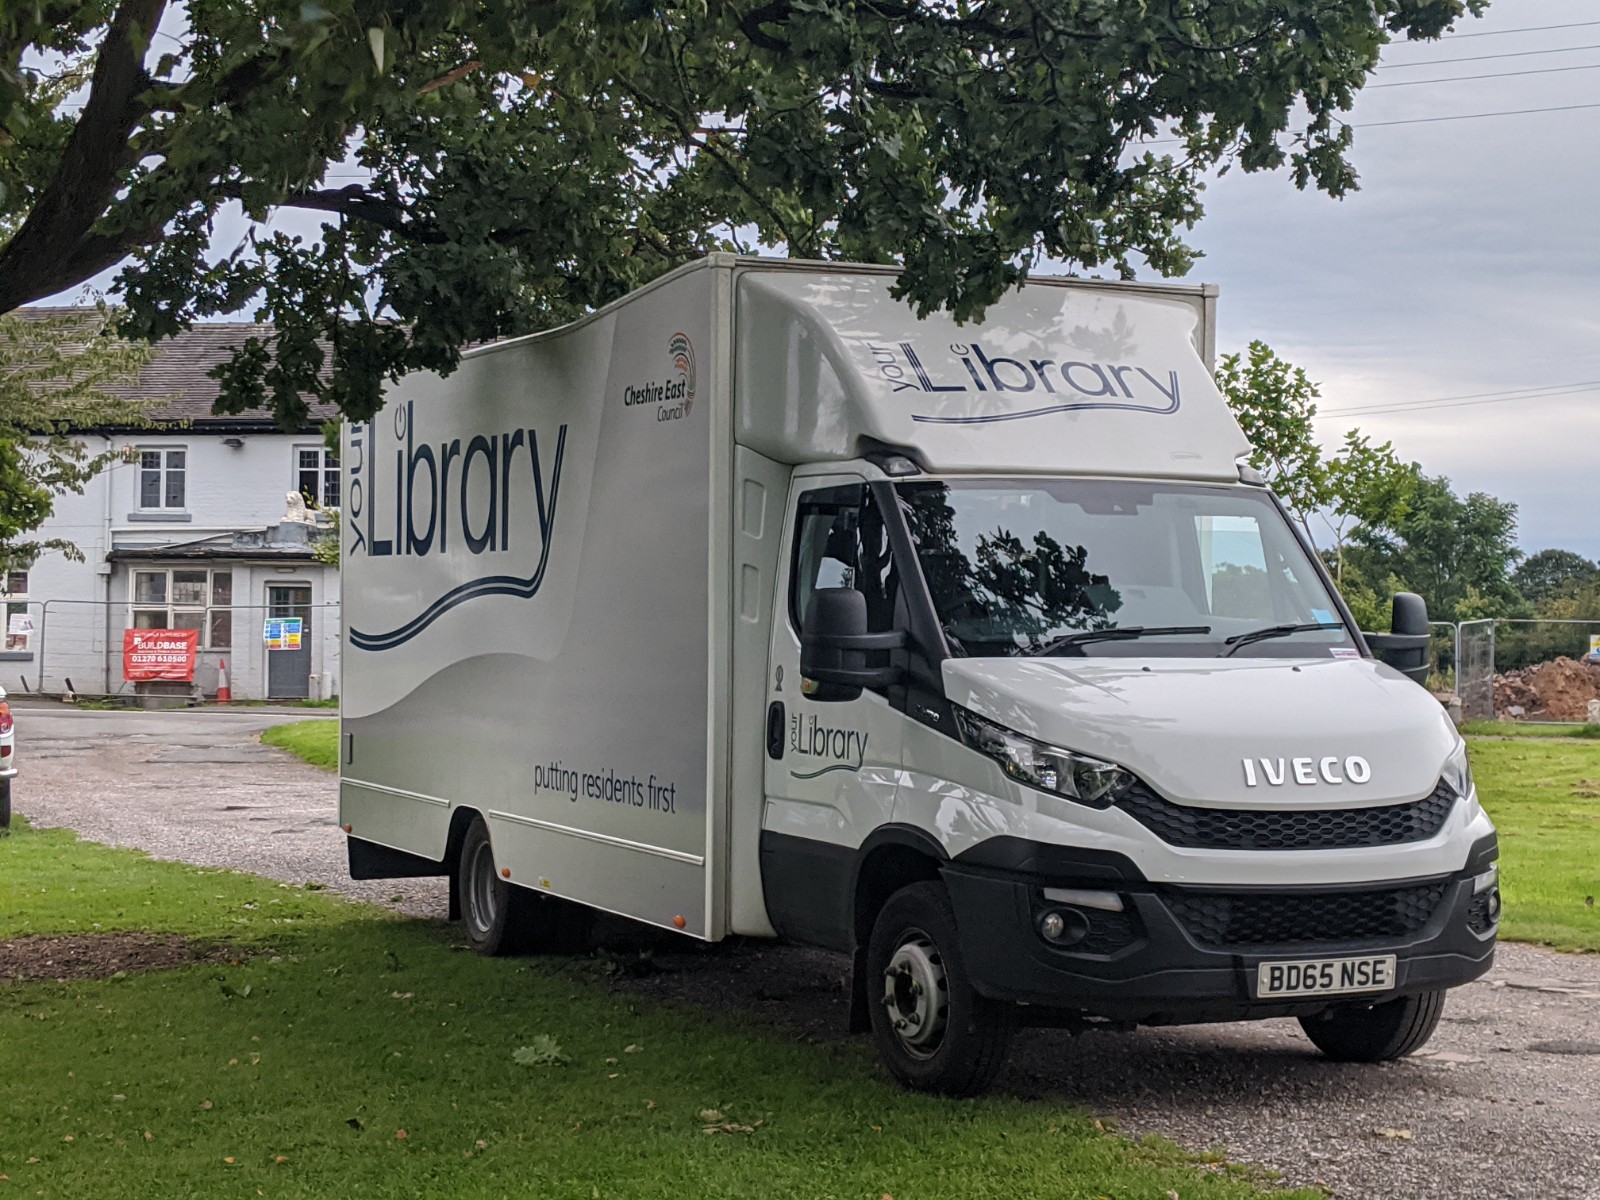 Mobile Library back in business, September 7th